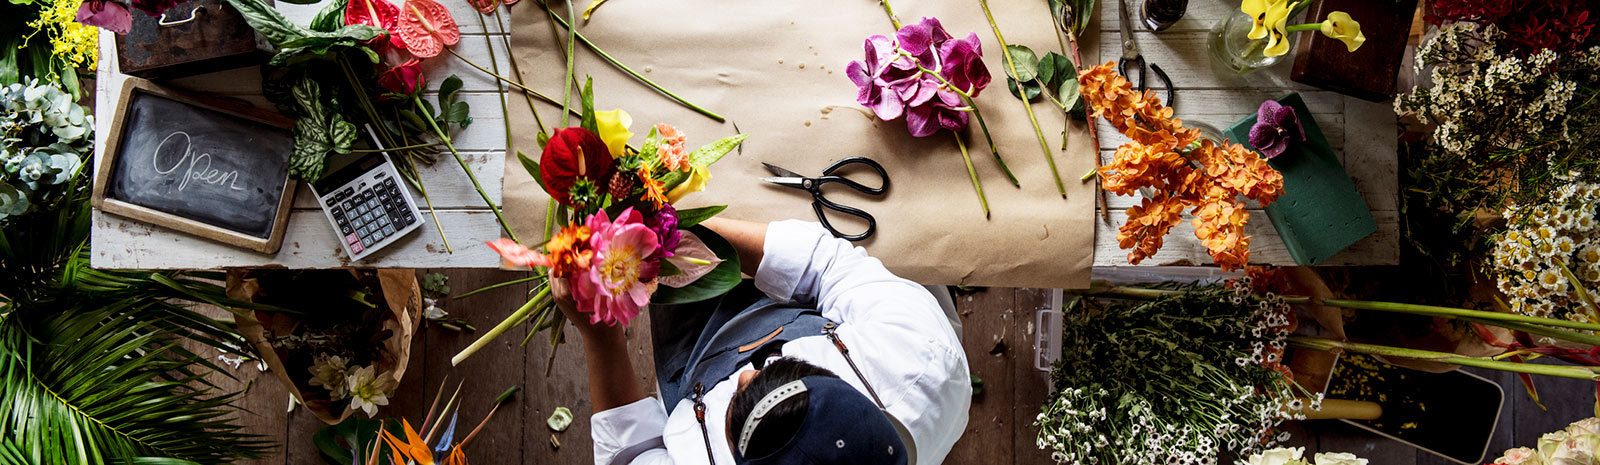 Top-down view of a person working with flowers